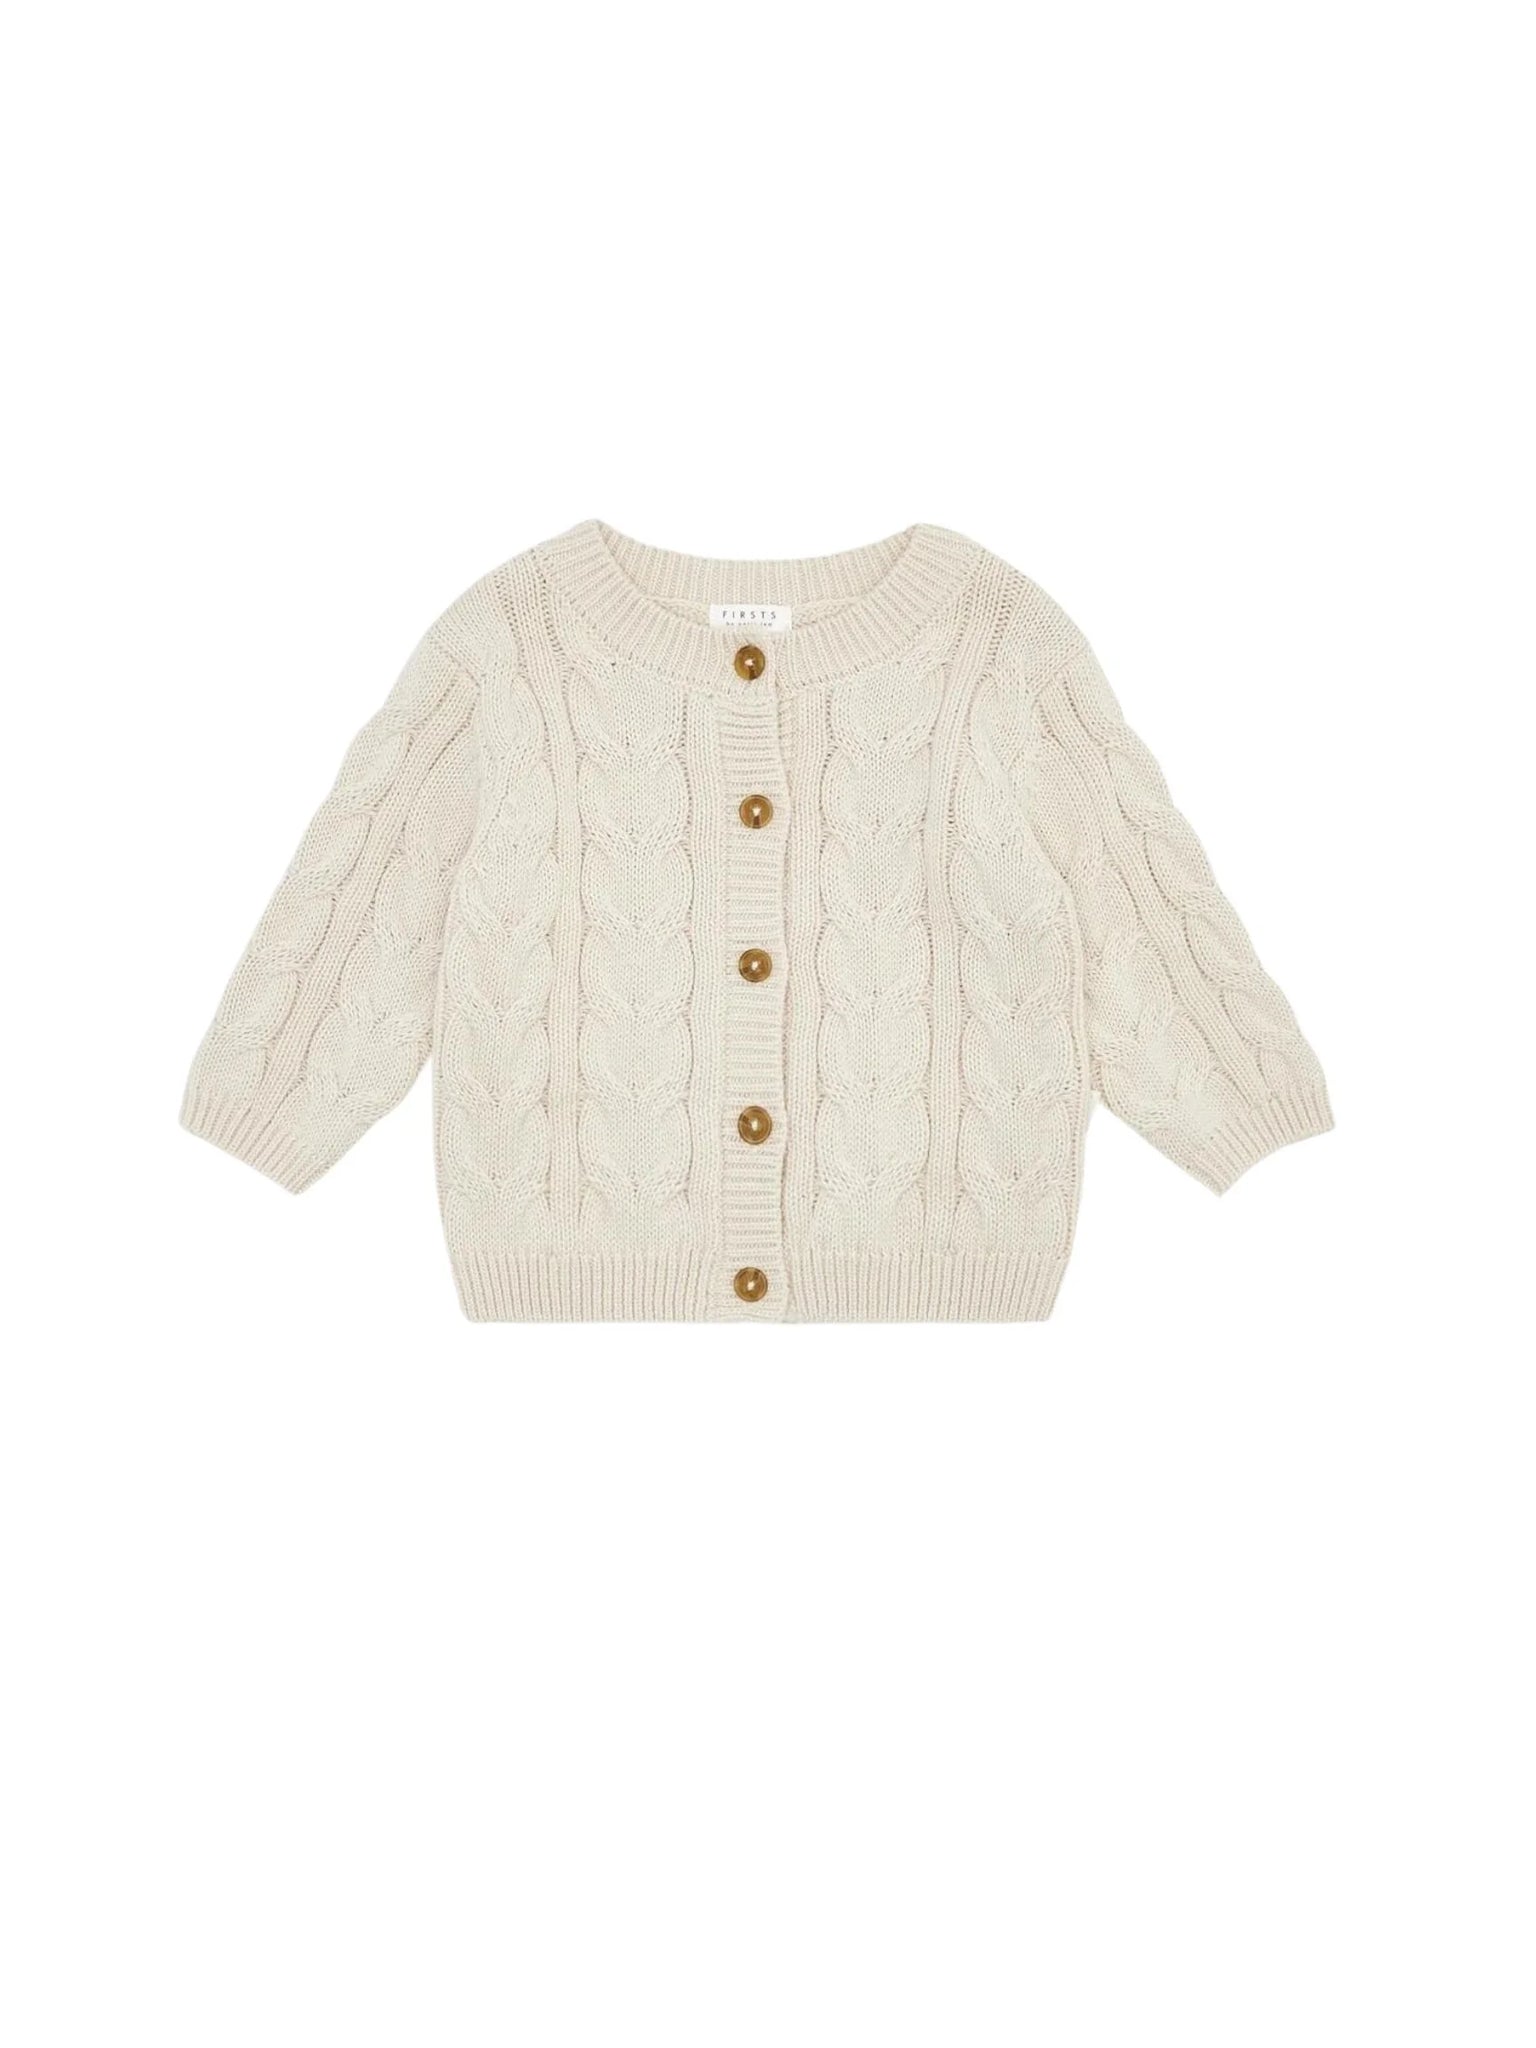 Cream Cable Knit Cardigan Sweater